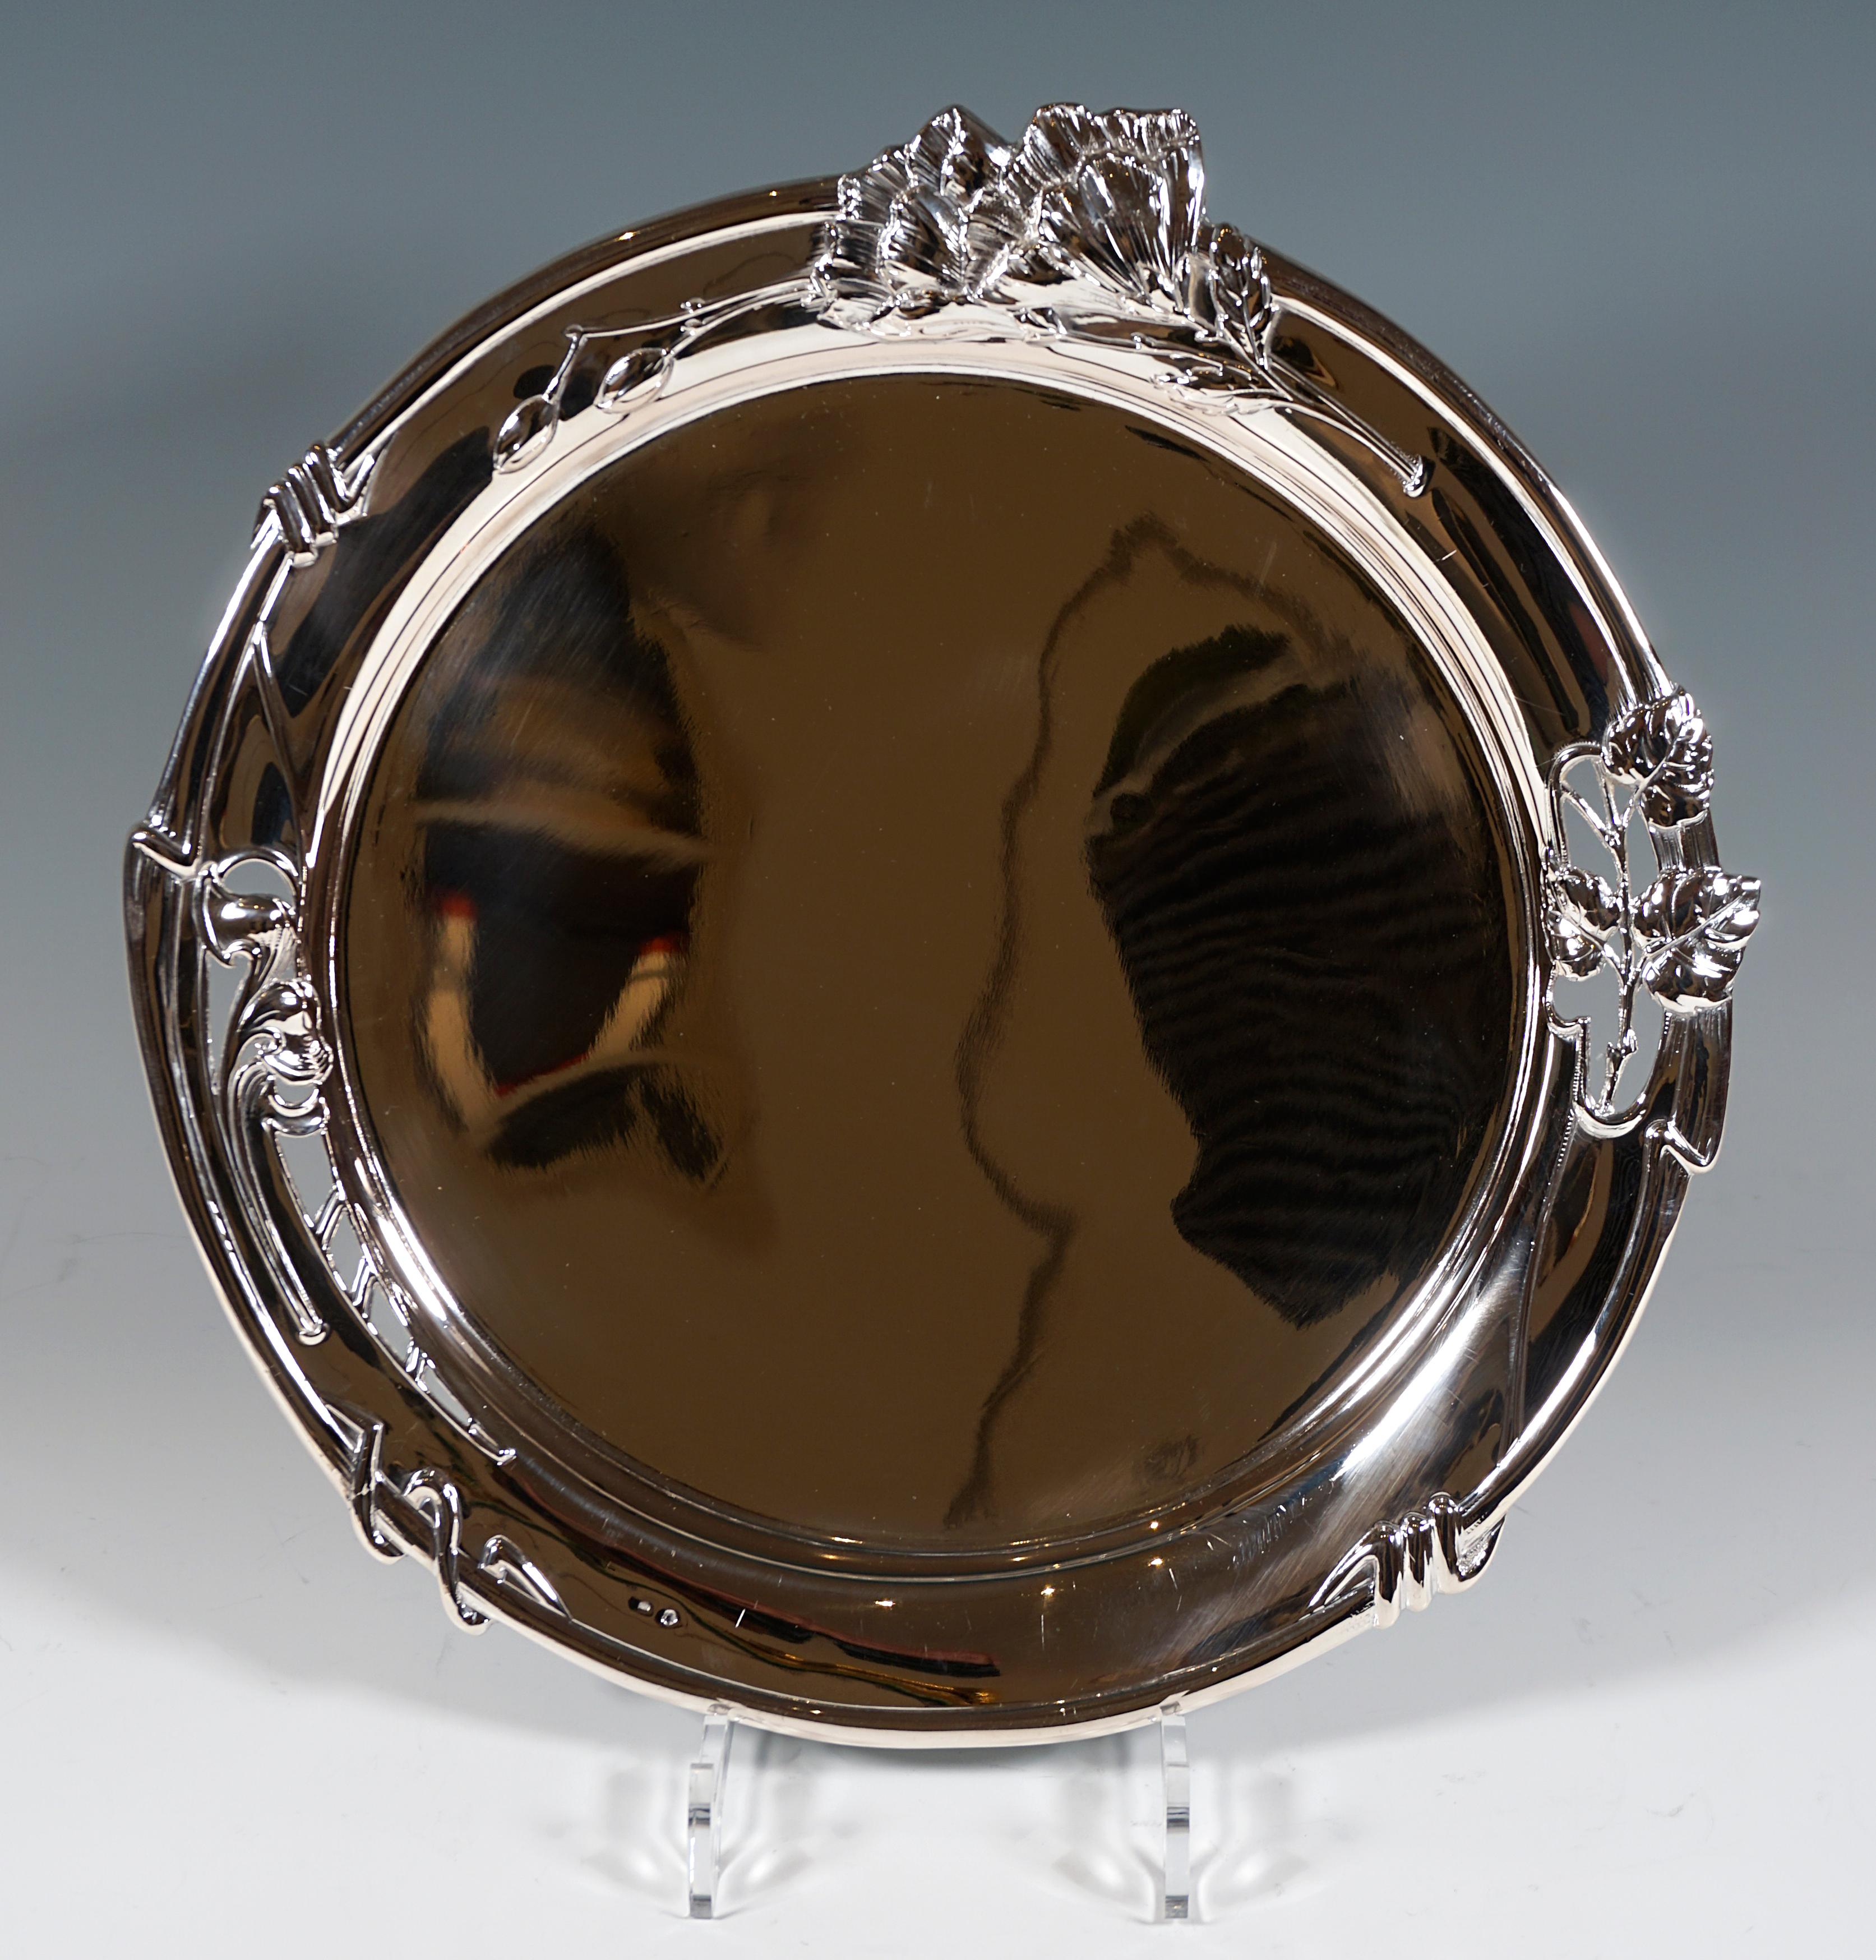 Decorative round silver tray with smooth mirror, rim decorated by floral relief and openings.

Hallmarks:
Diana's head + 'C' - Austria-Hungarian official hallmark 1872-1922 for 800 Silver, Prague
Manufactory brand 'J.M' polygon framed

Total